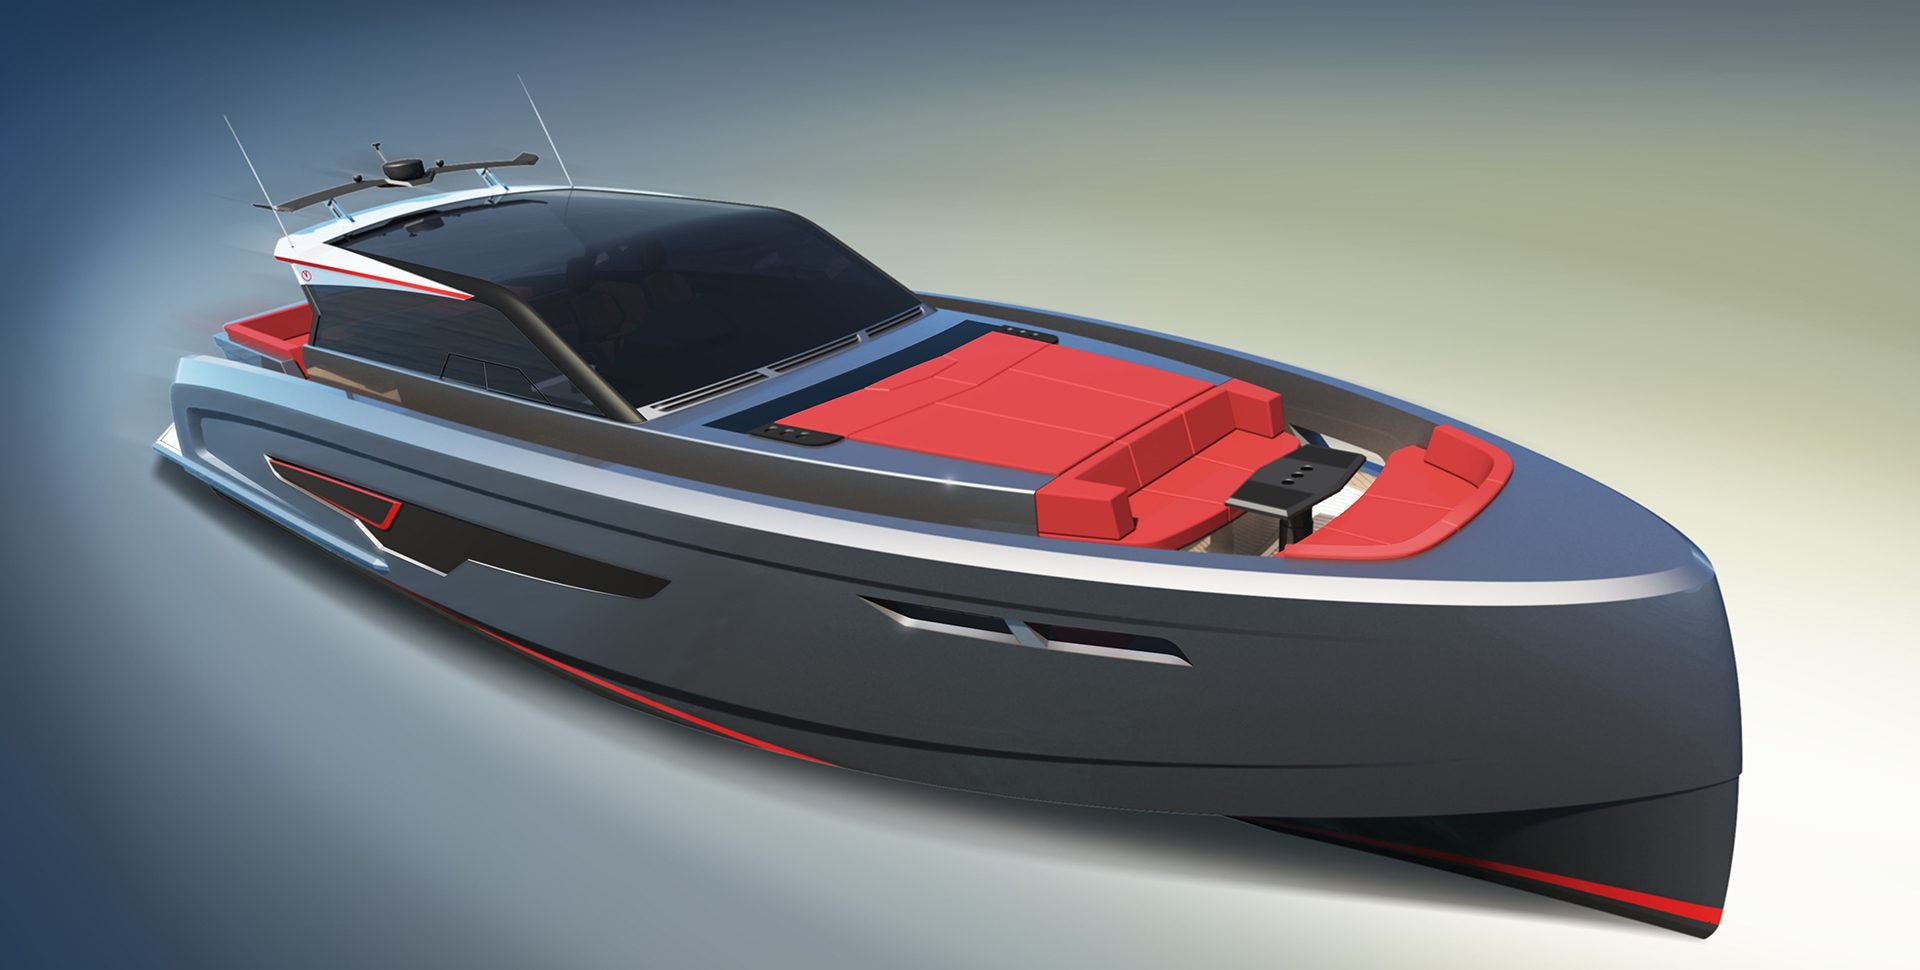 Vanquish_yachts_VQ60_Veloce_concept_model_front_view